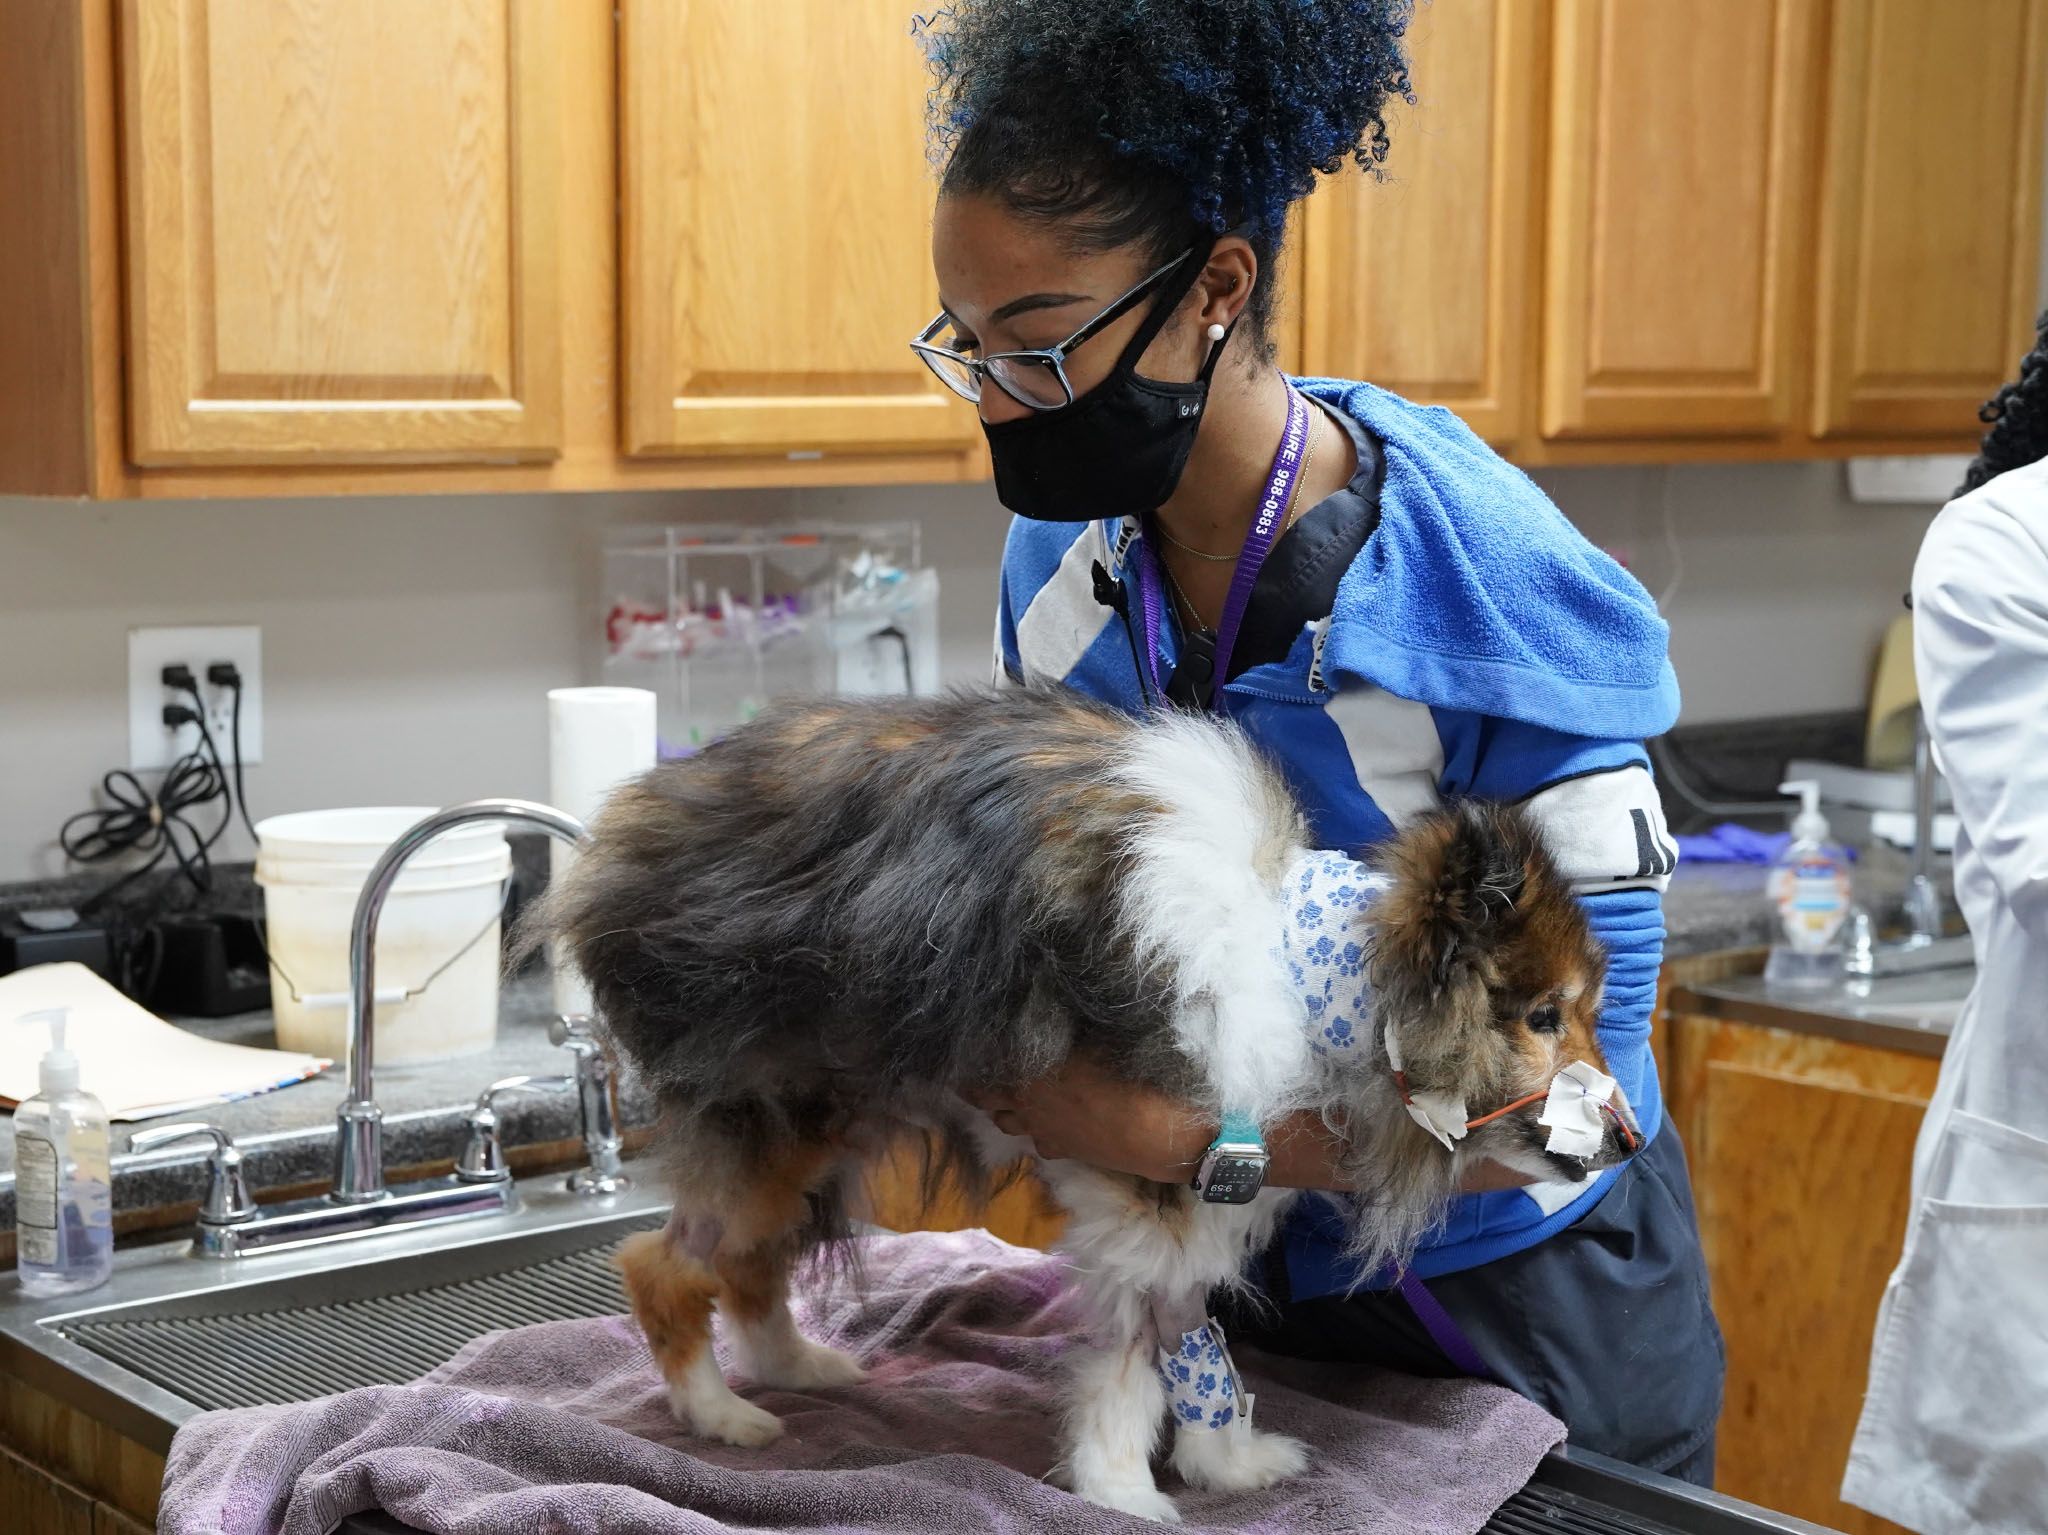 Vet Tech Darrie preps a Sheltie dog for examination in the Treatment Room of Critter Fixer... [Photo of the day - May 2021]